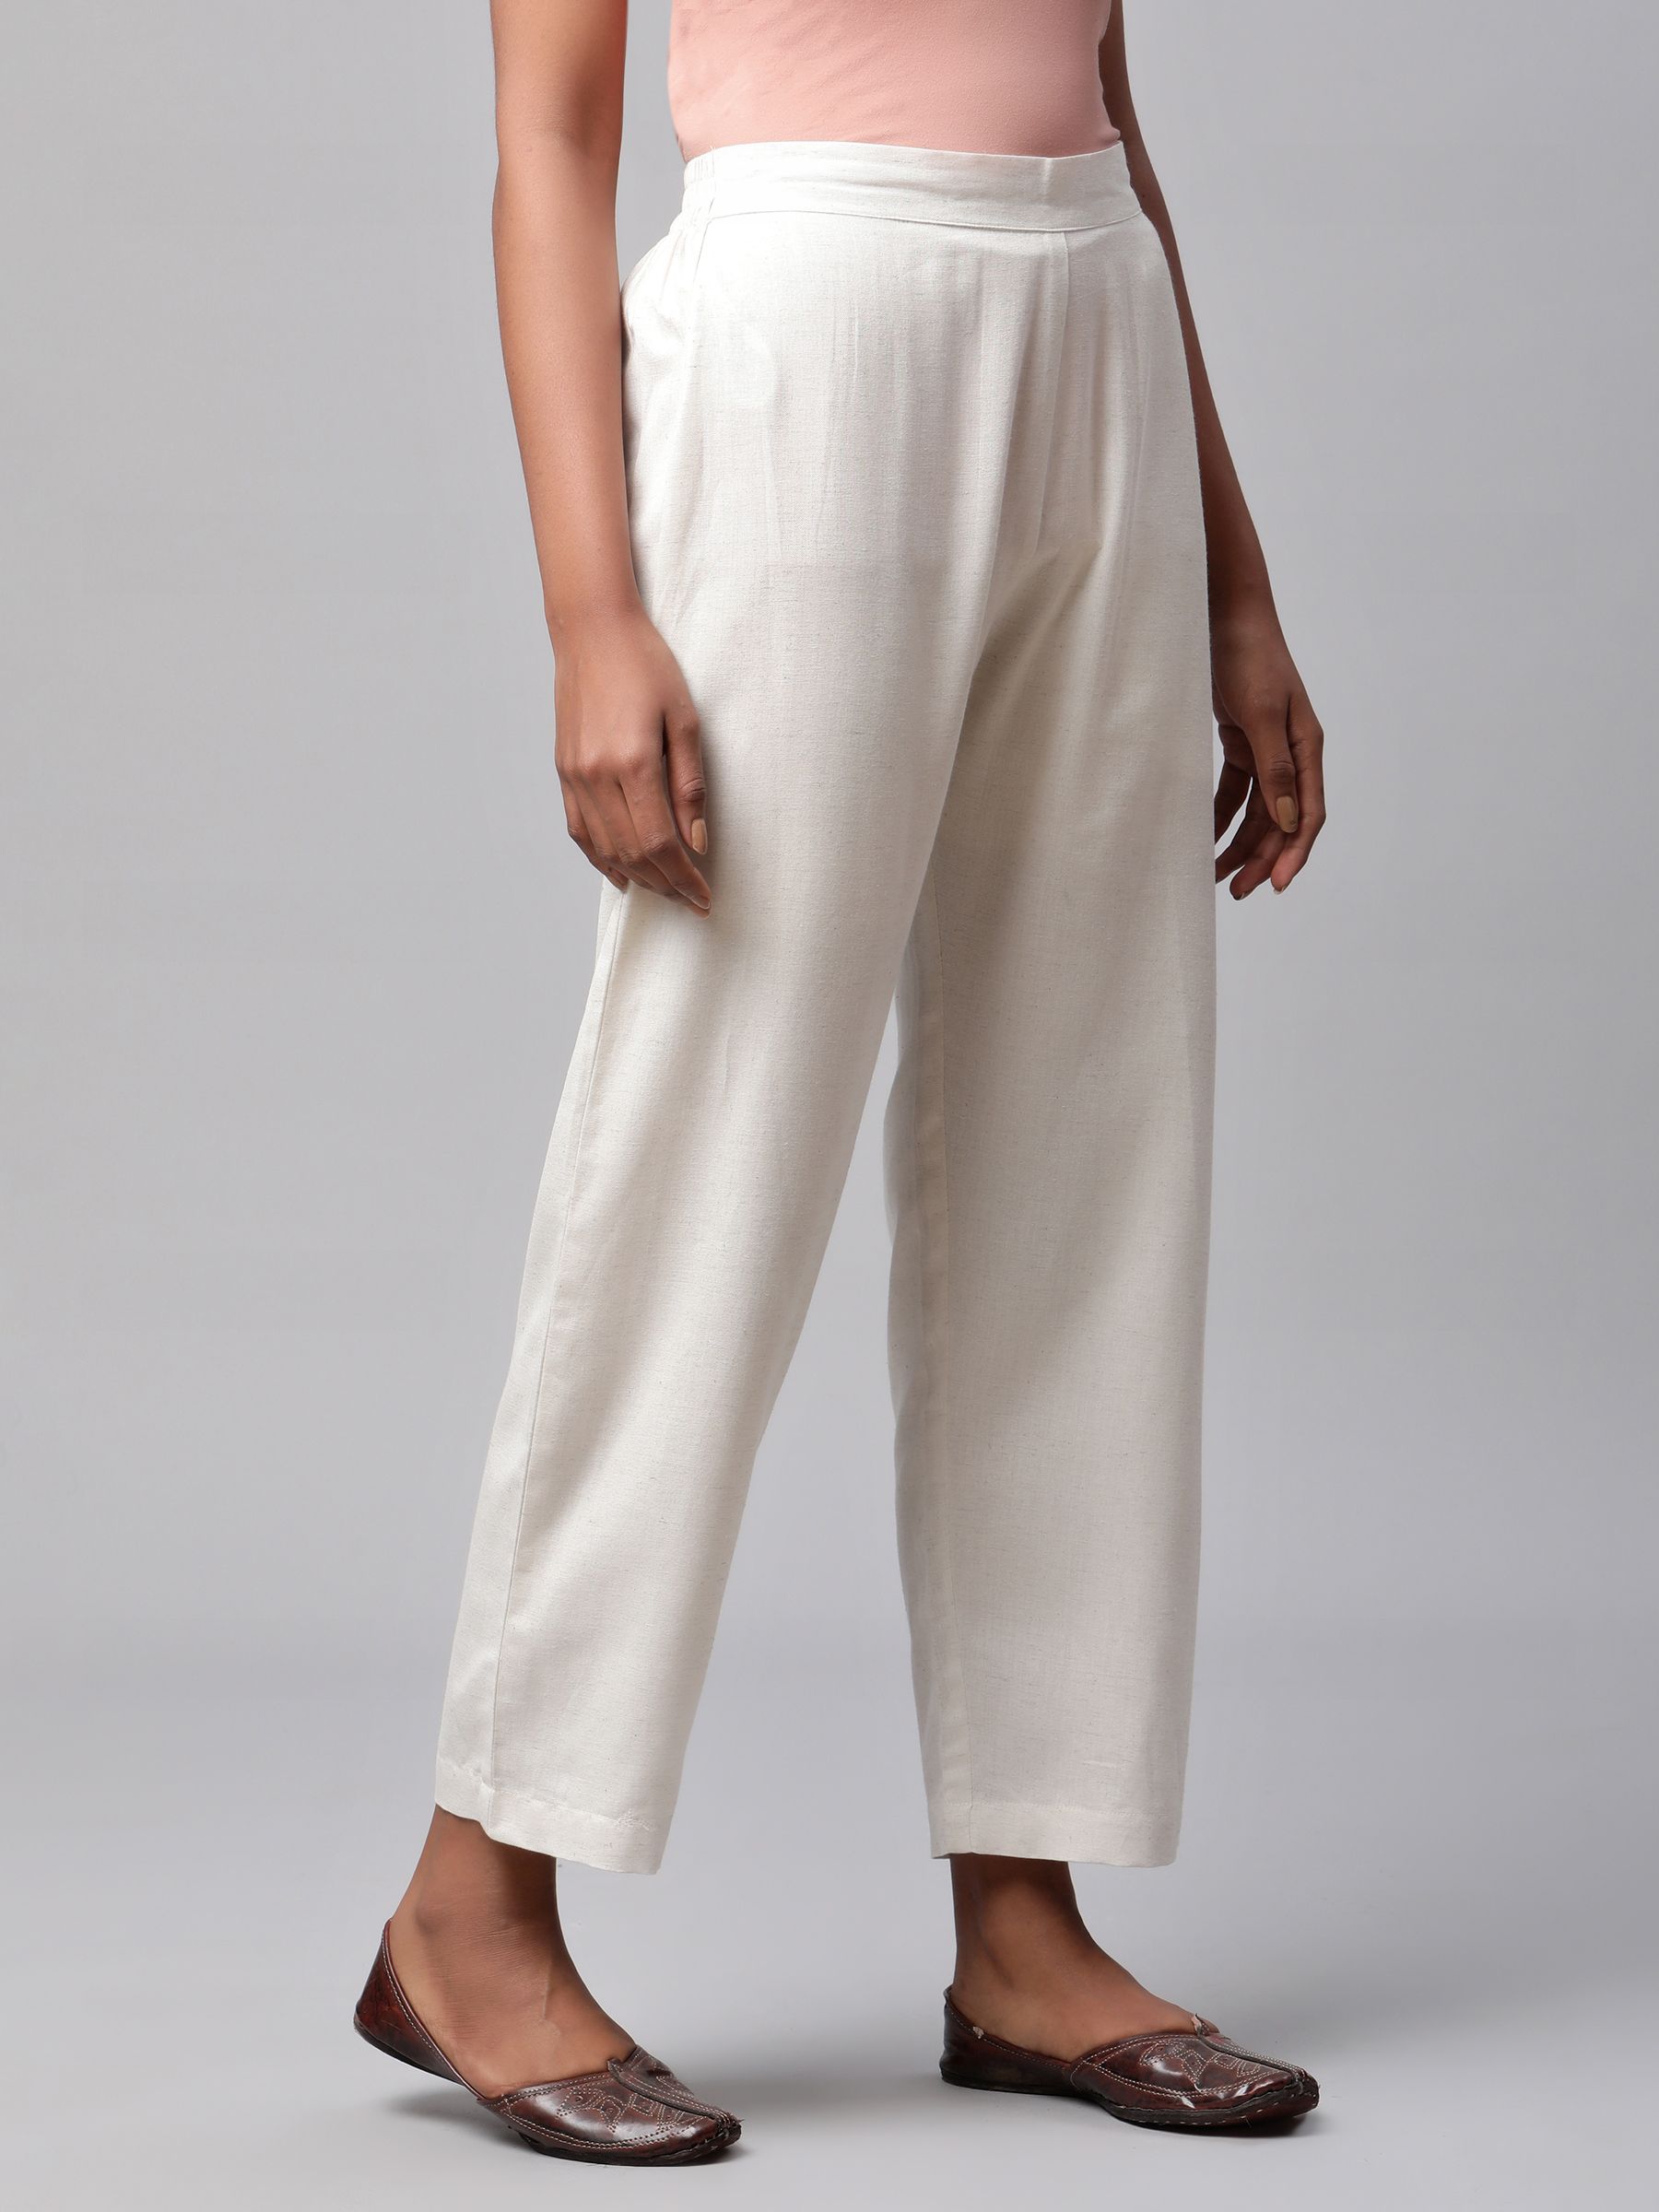 Linen Pants Are a Summer Wardrobe Essential